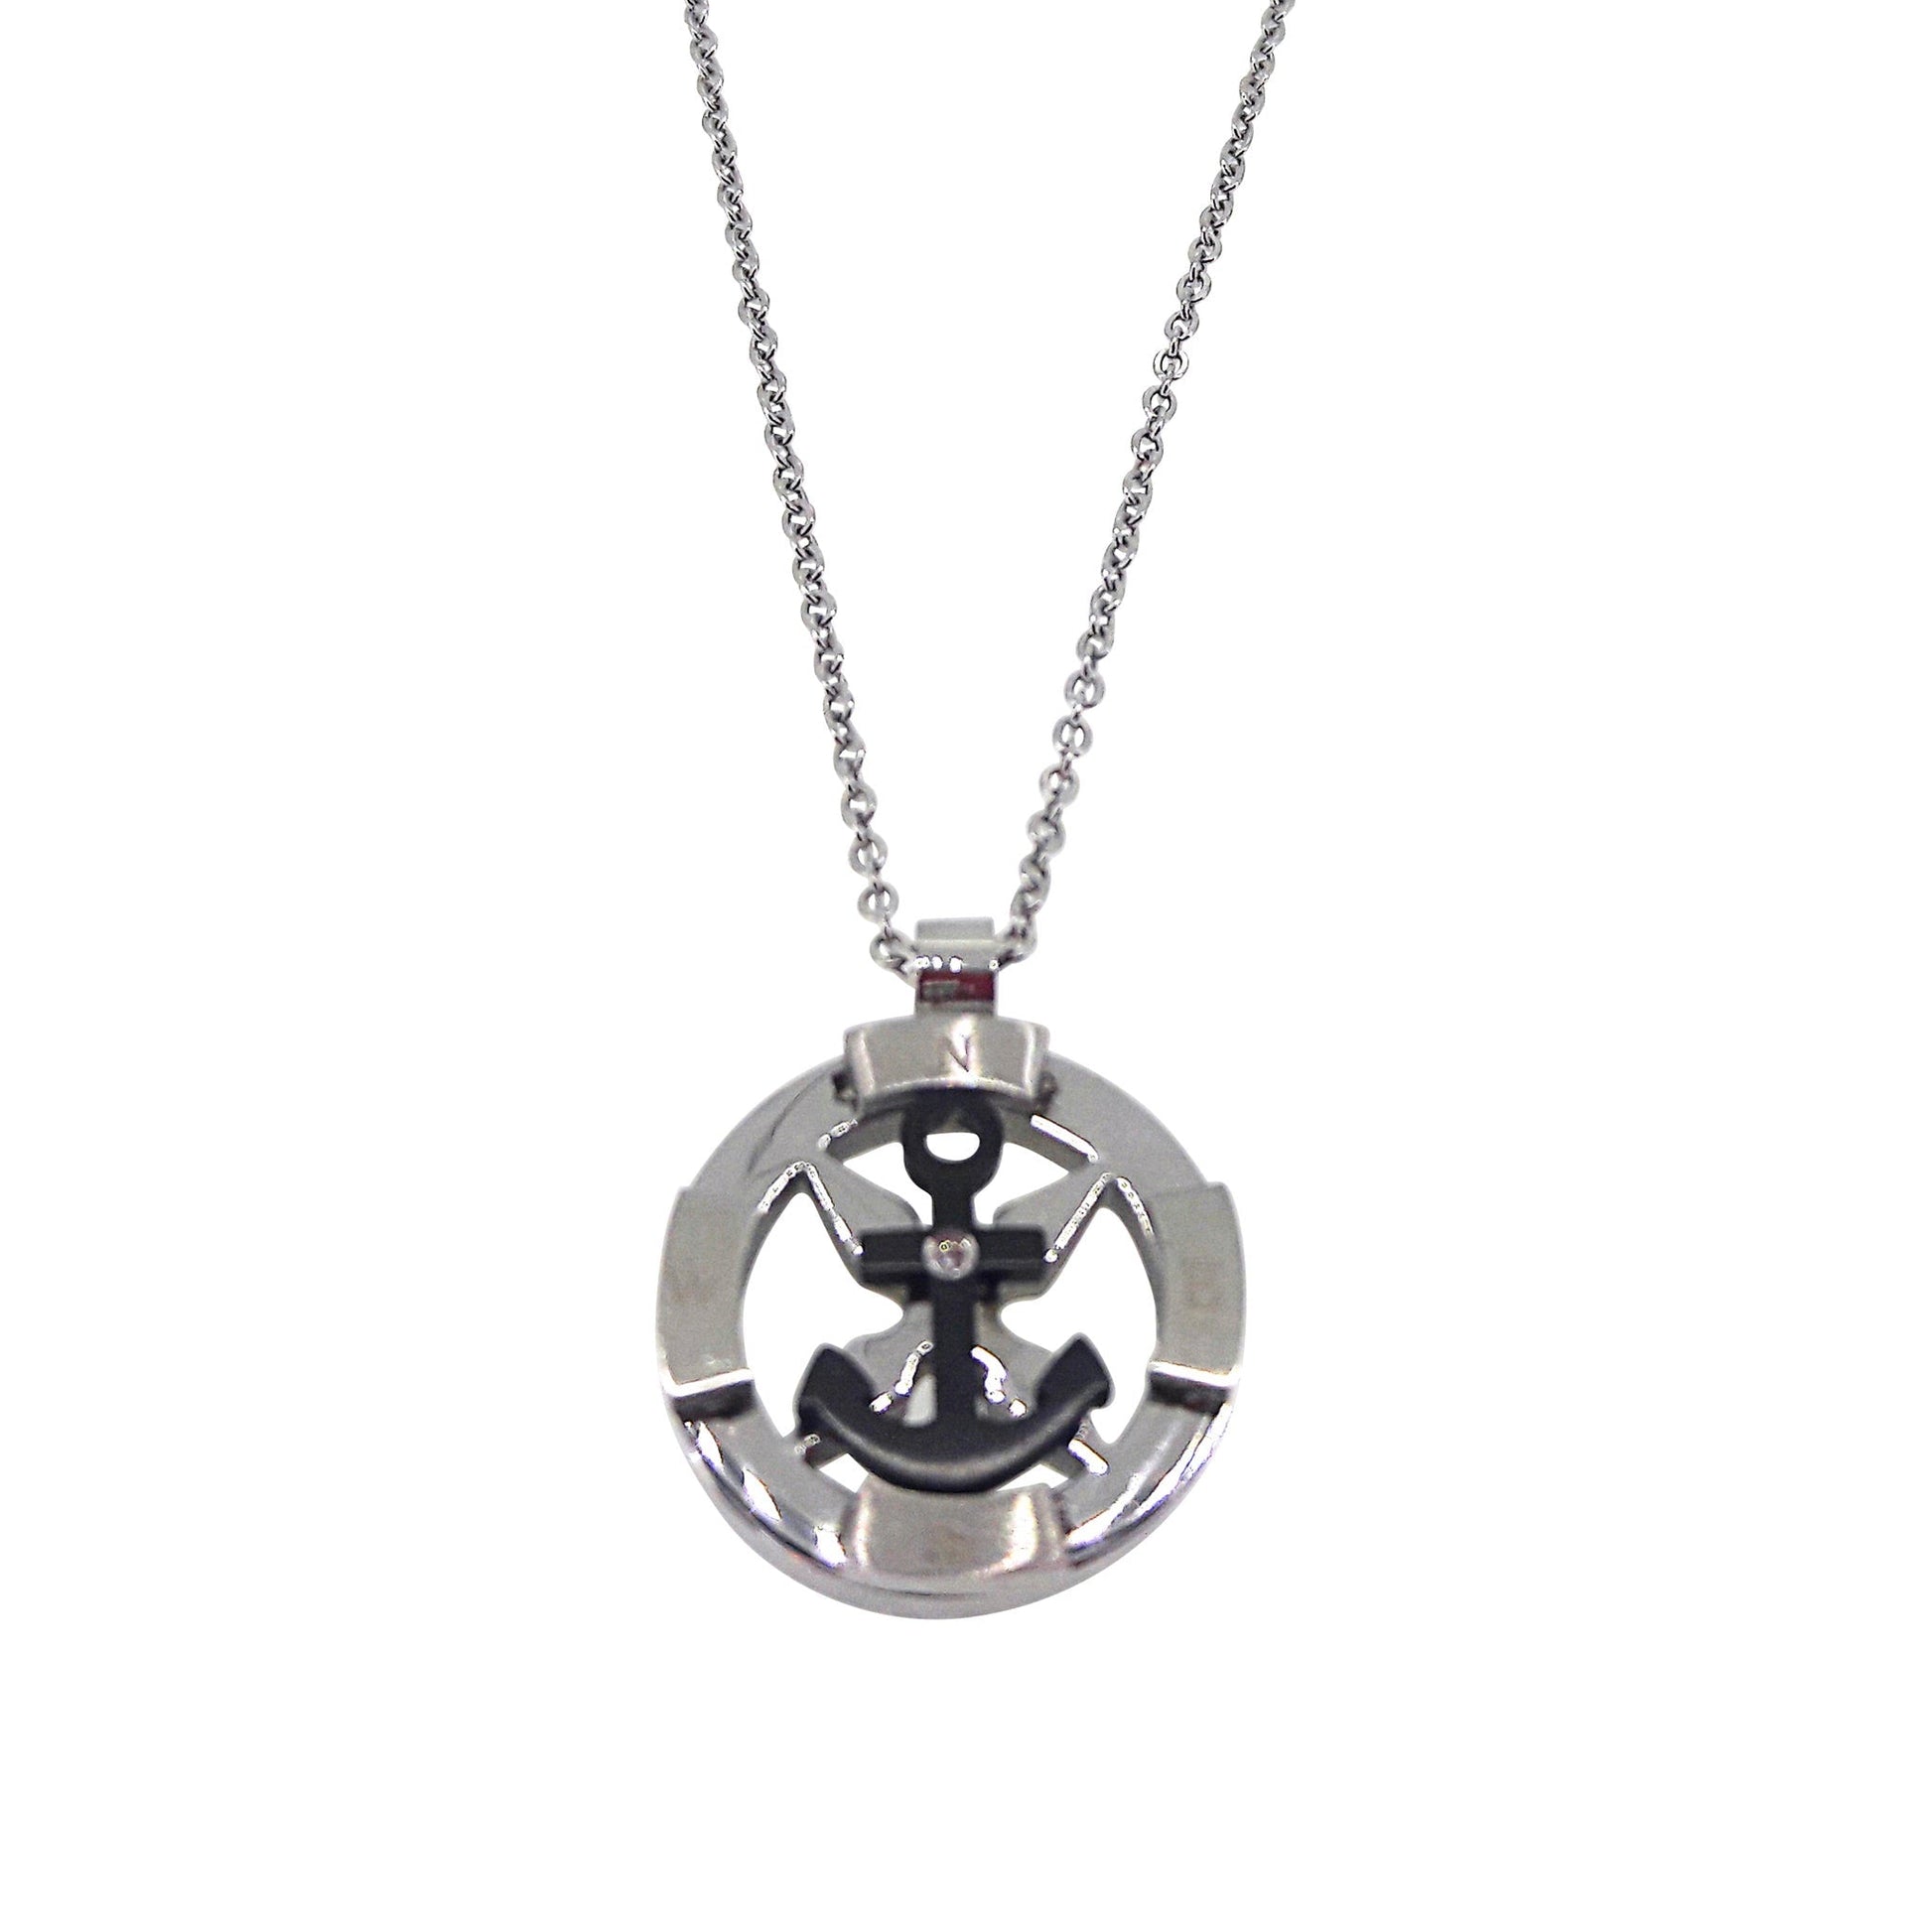 A stainless steel nautical compass and black anchor with simulated diamond on chain displayed on a neutral white background.